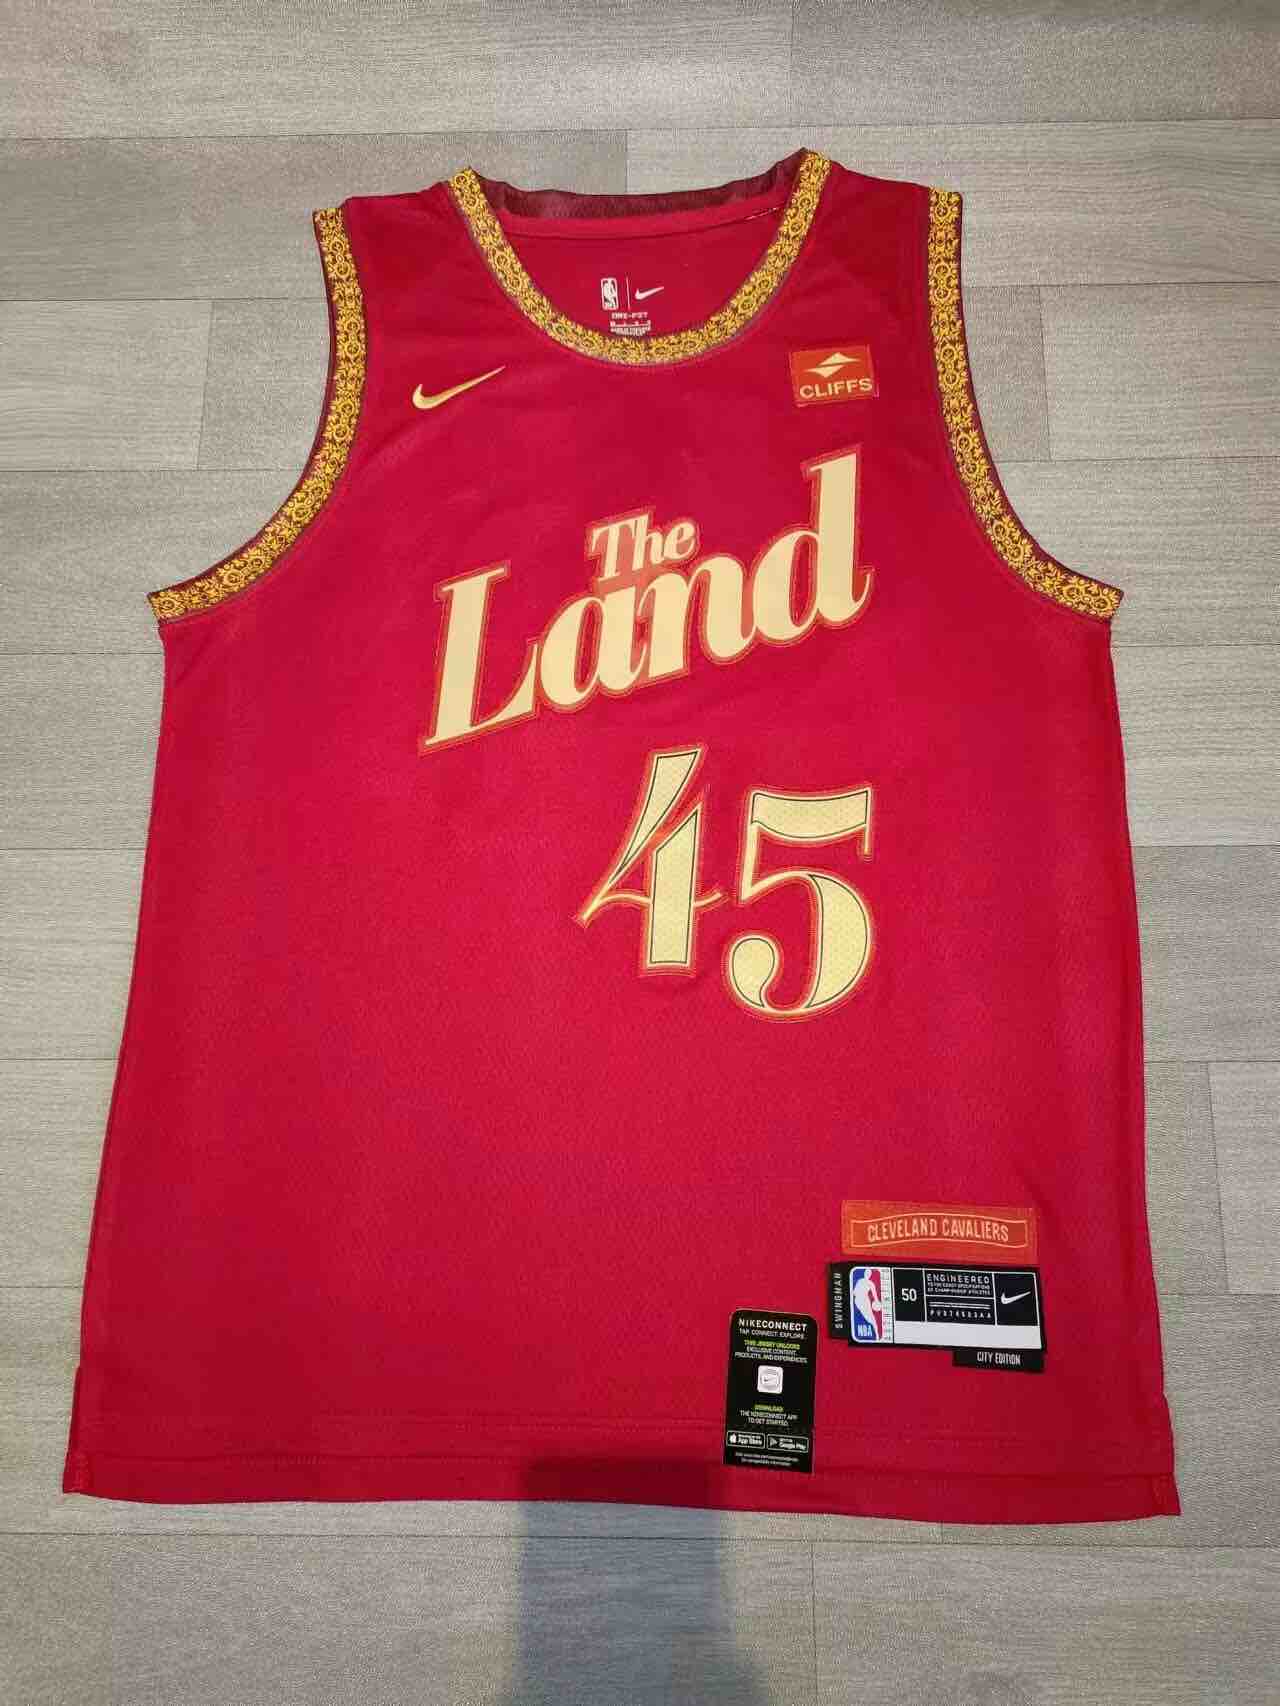 Nike NBA Cleveland Cavaliers #45 Mitchell Red Jersey